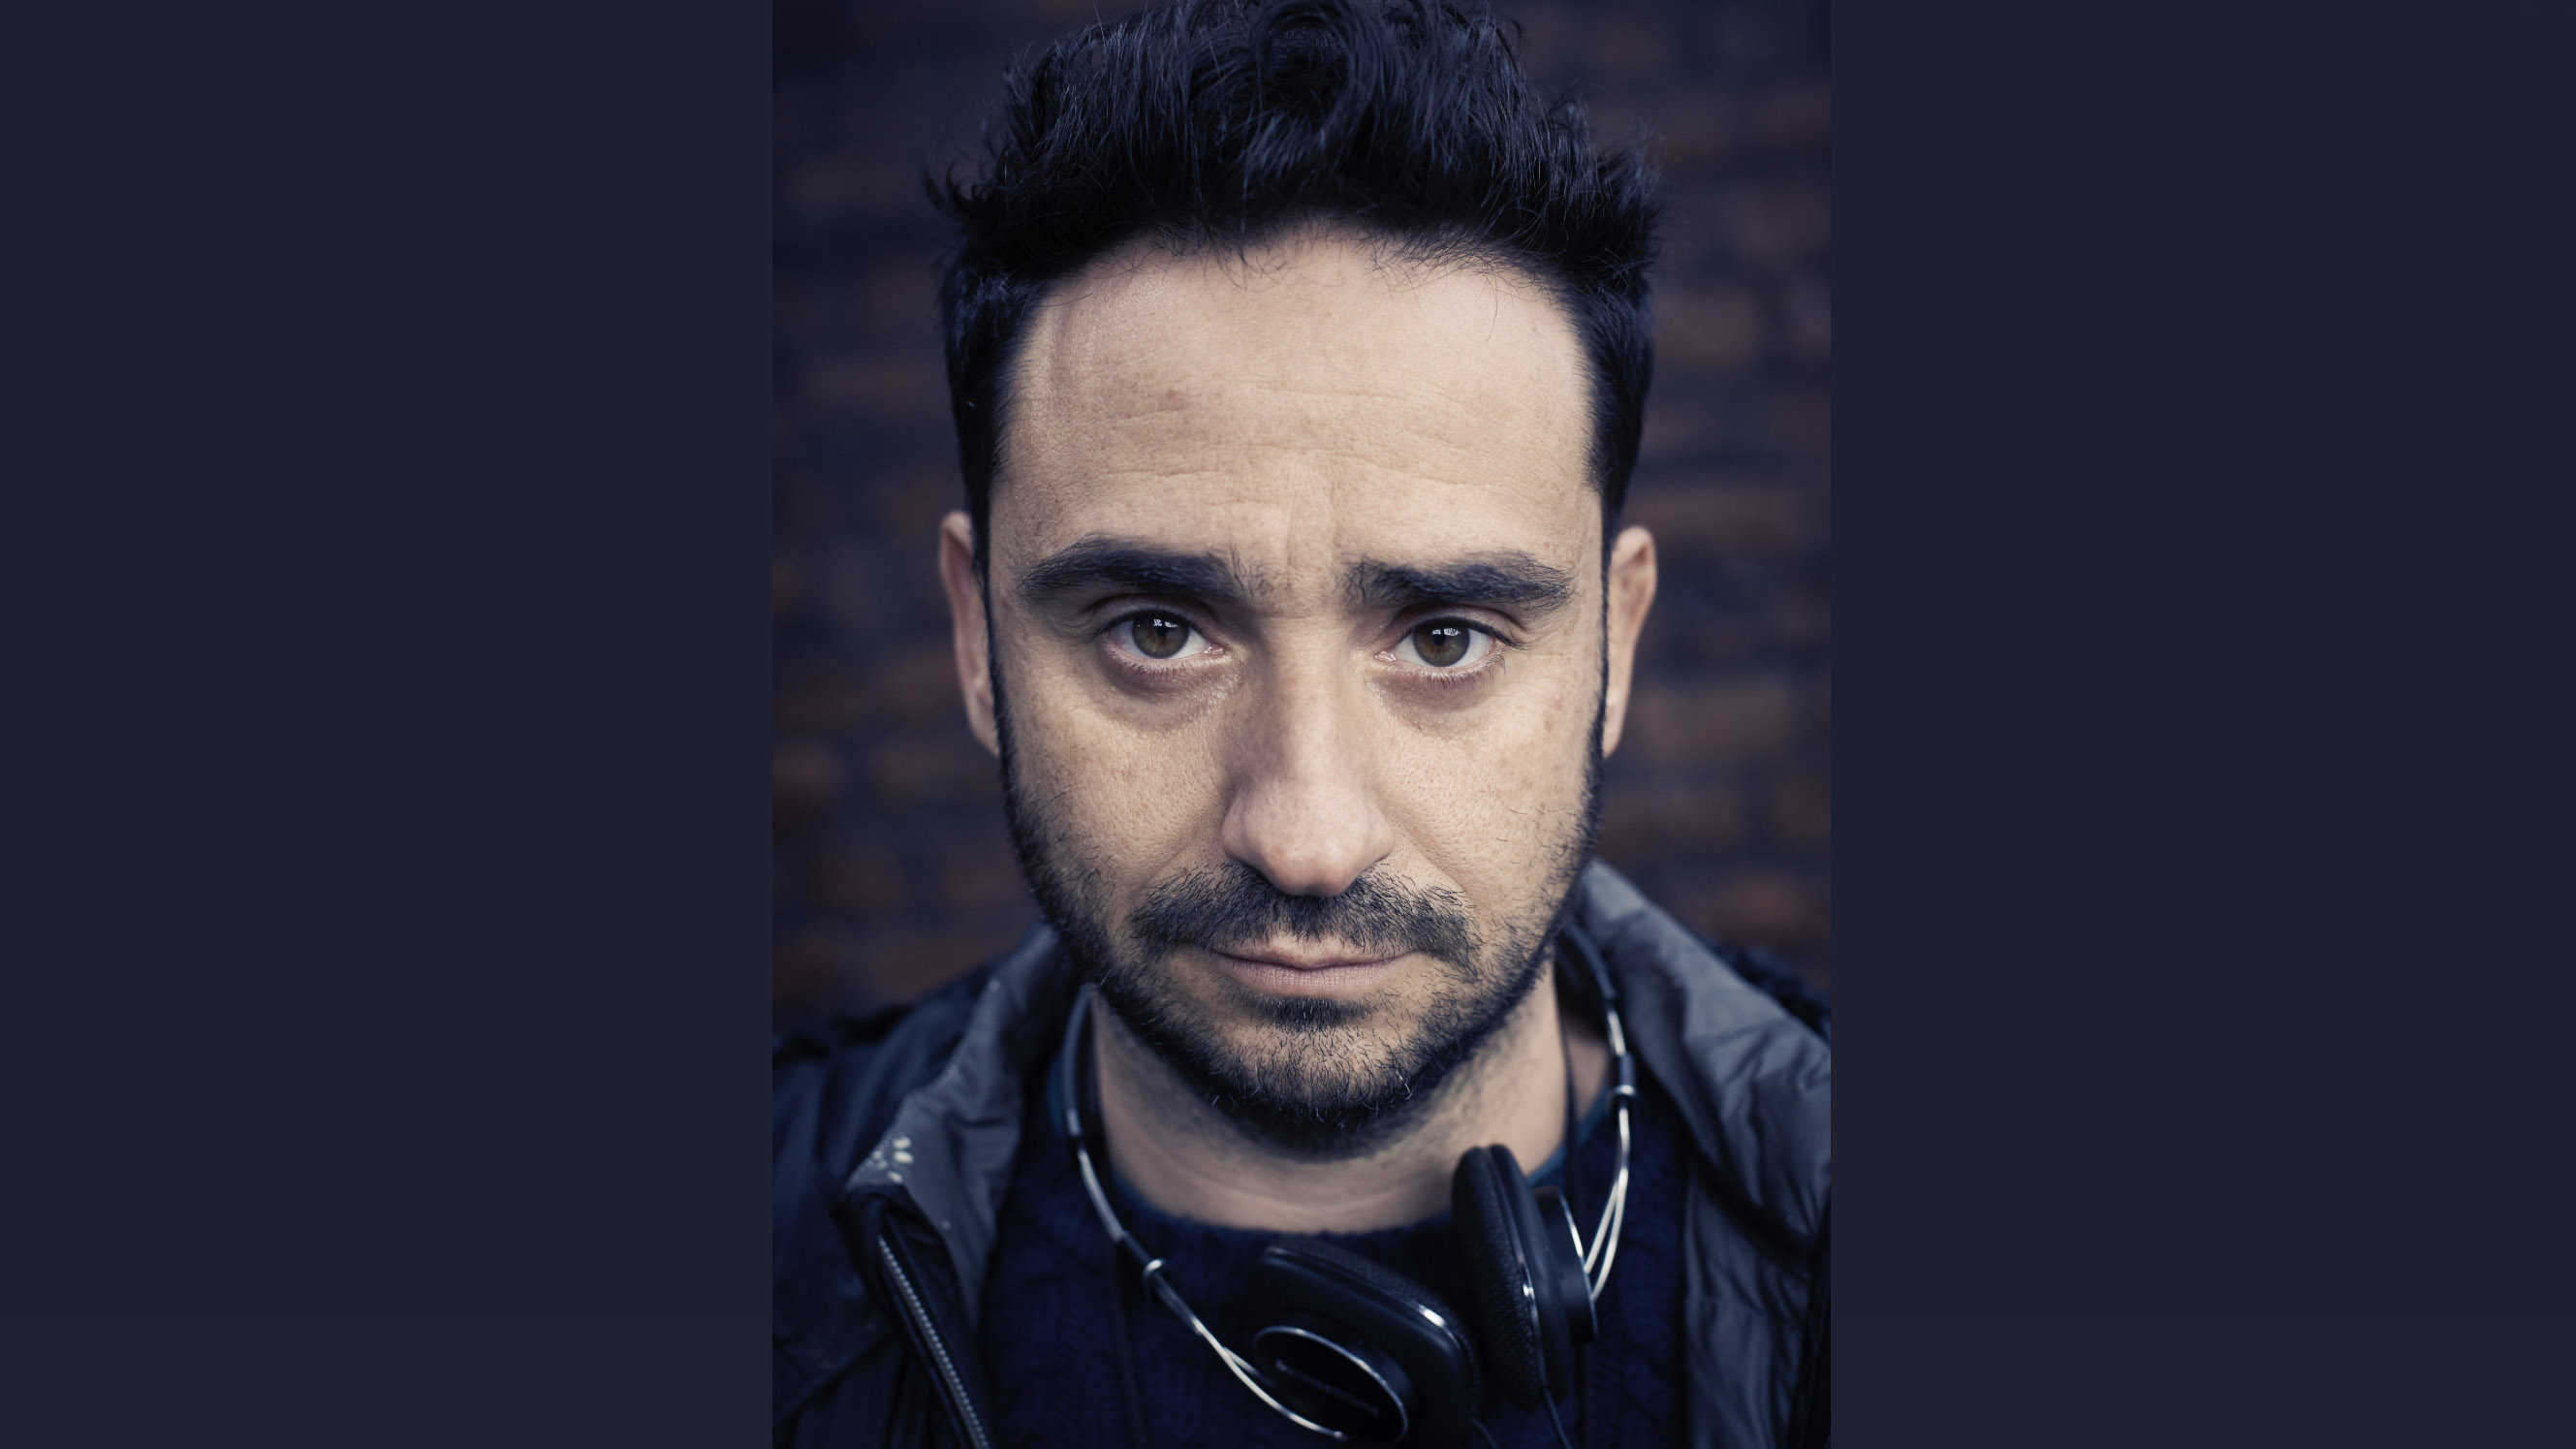 J.A. Bayona will lead production on Amazon Prime's Lord of the Rings TV show